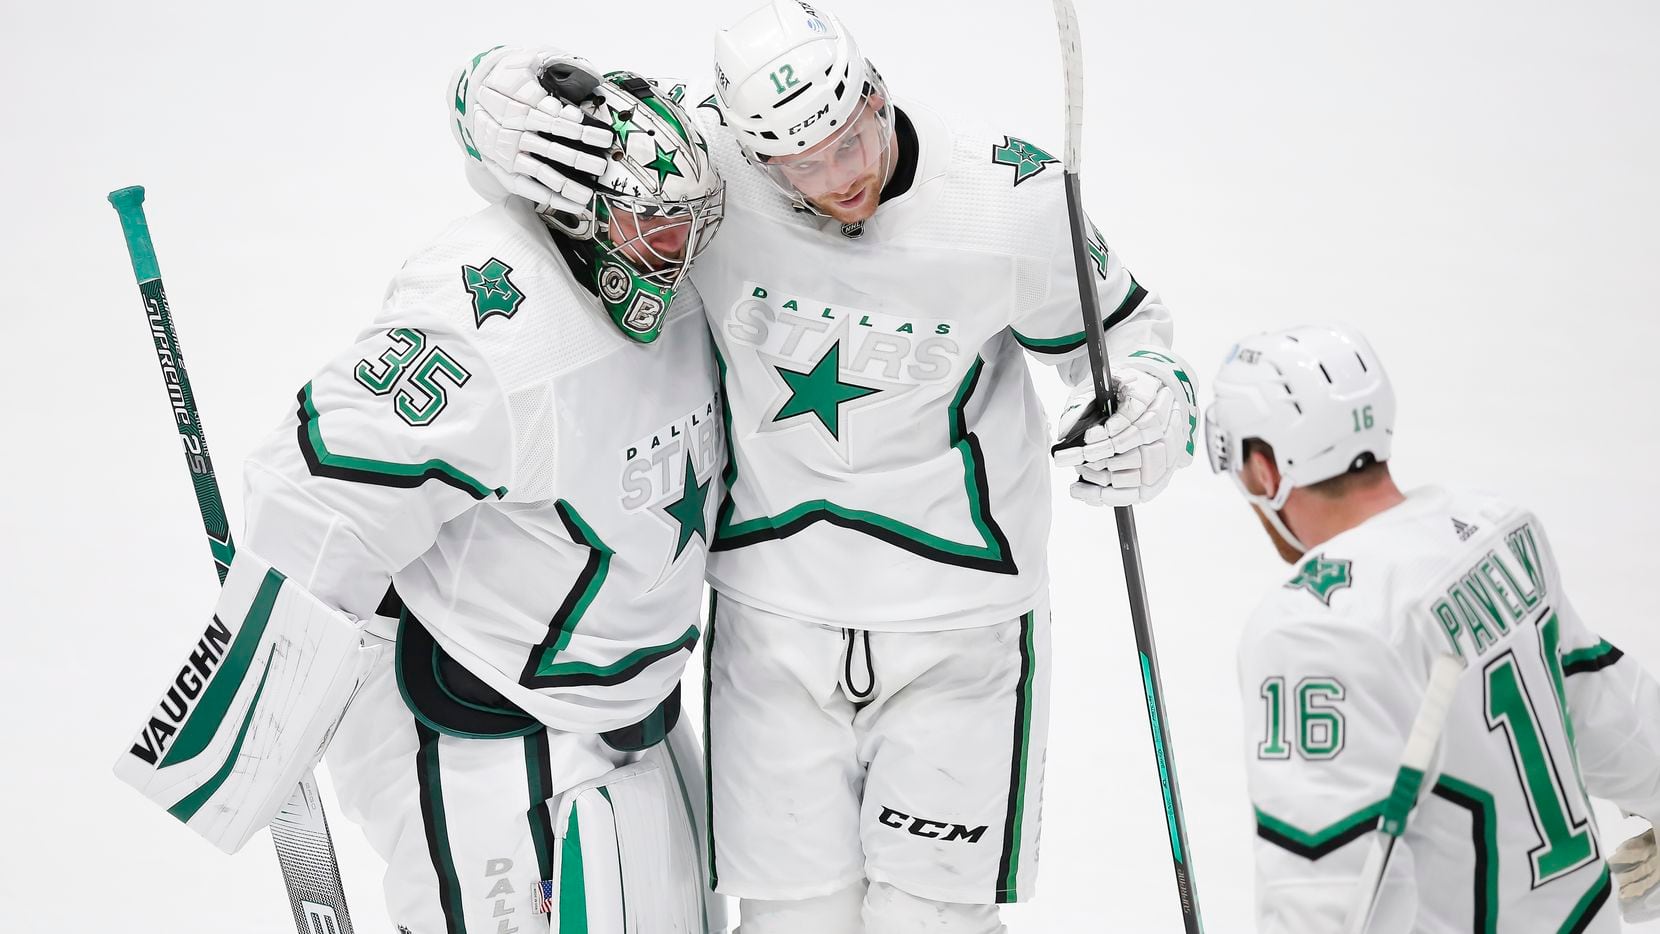 Though Stars Control Their Own Playoff Destiny Dallas Must Be Wary Of Tiebreaker Scenarios